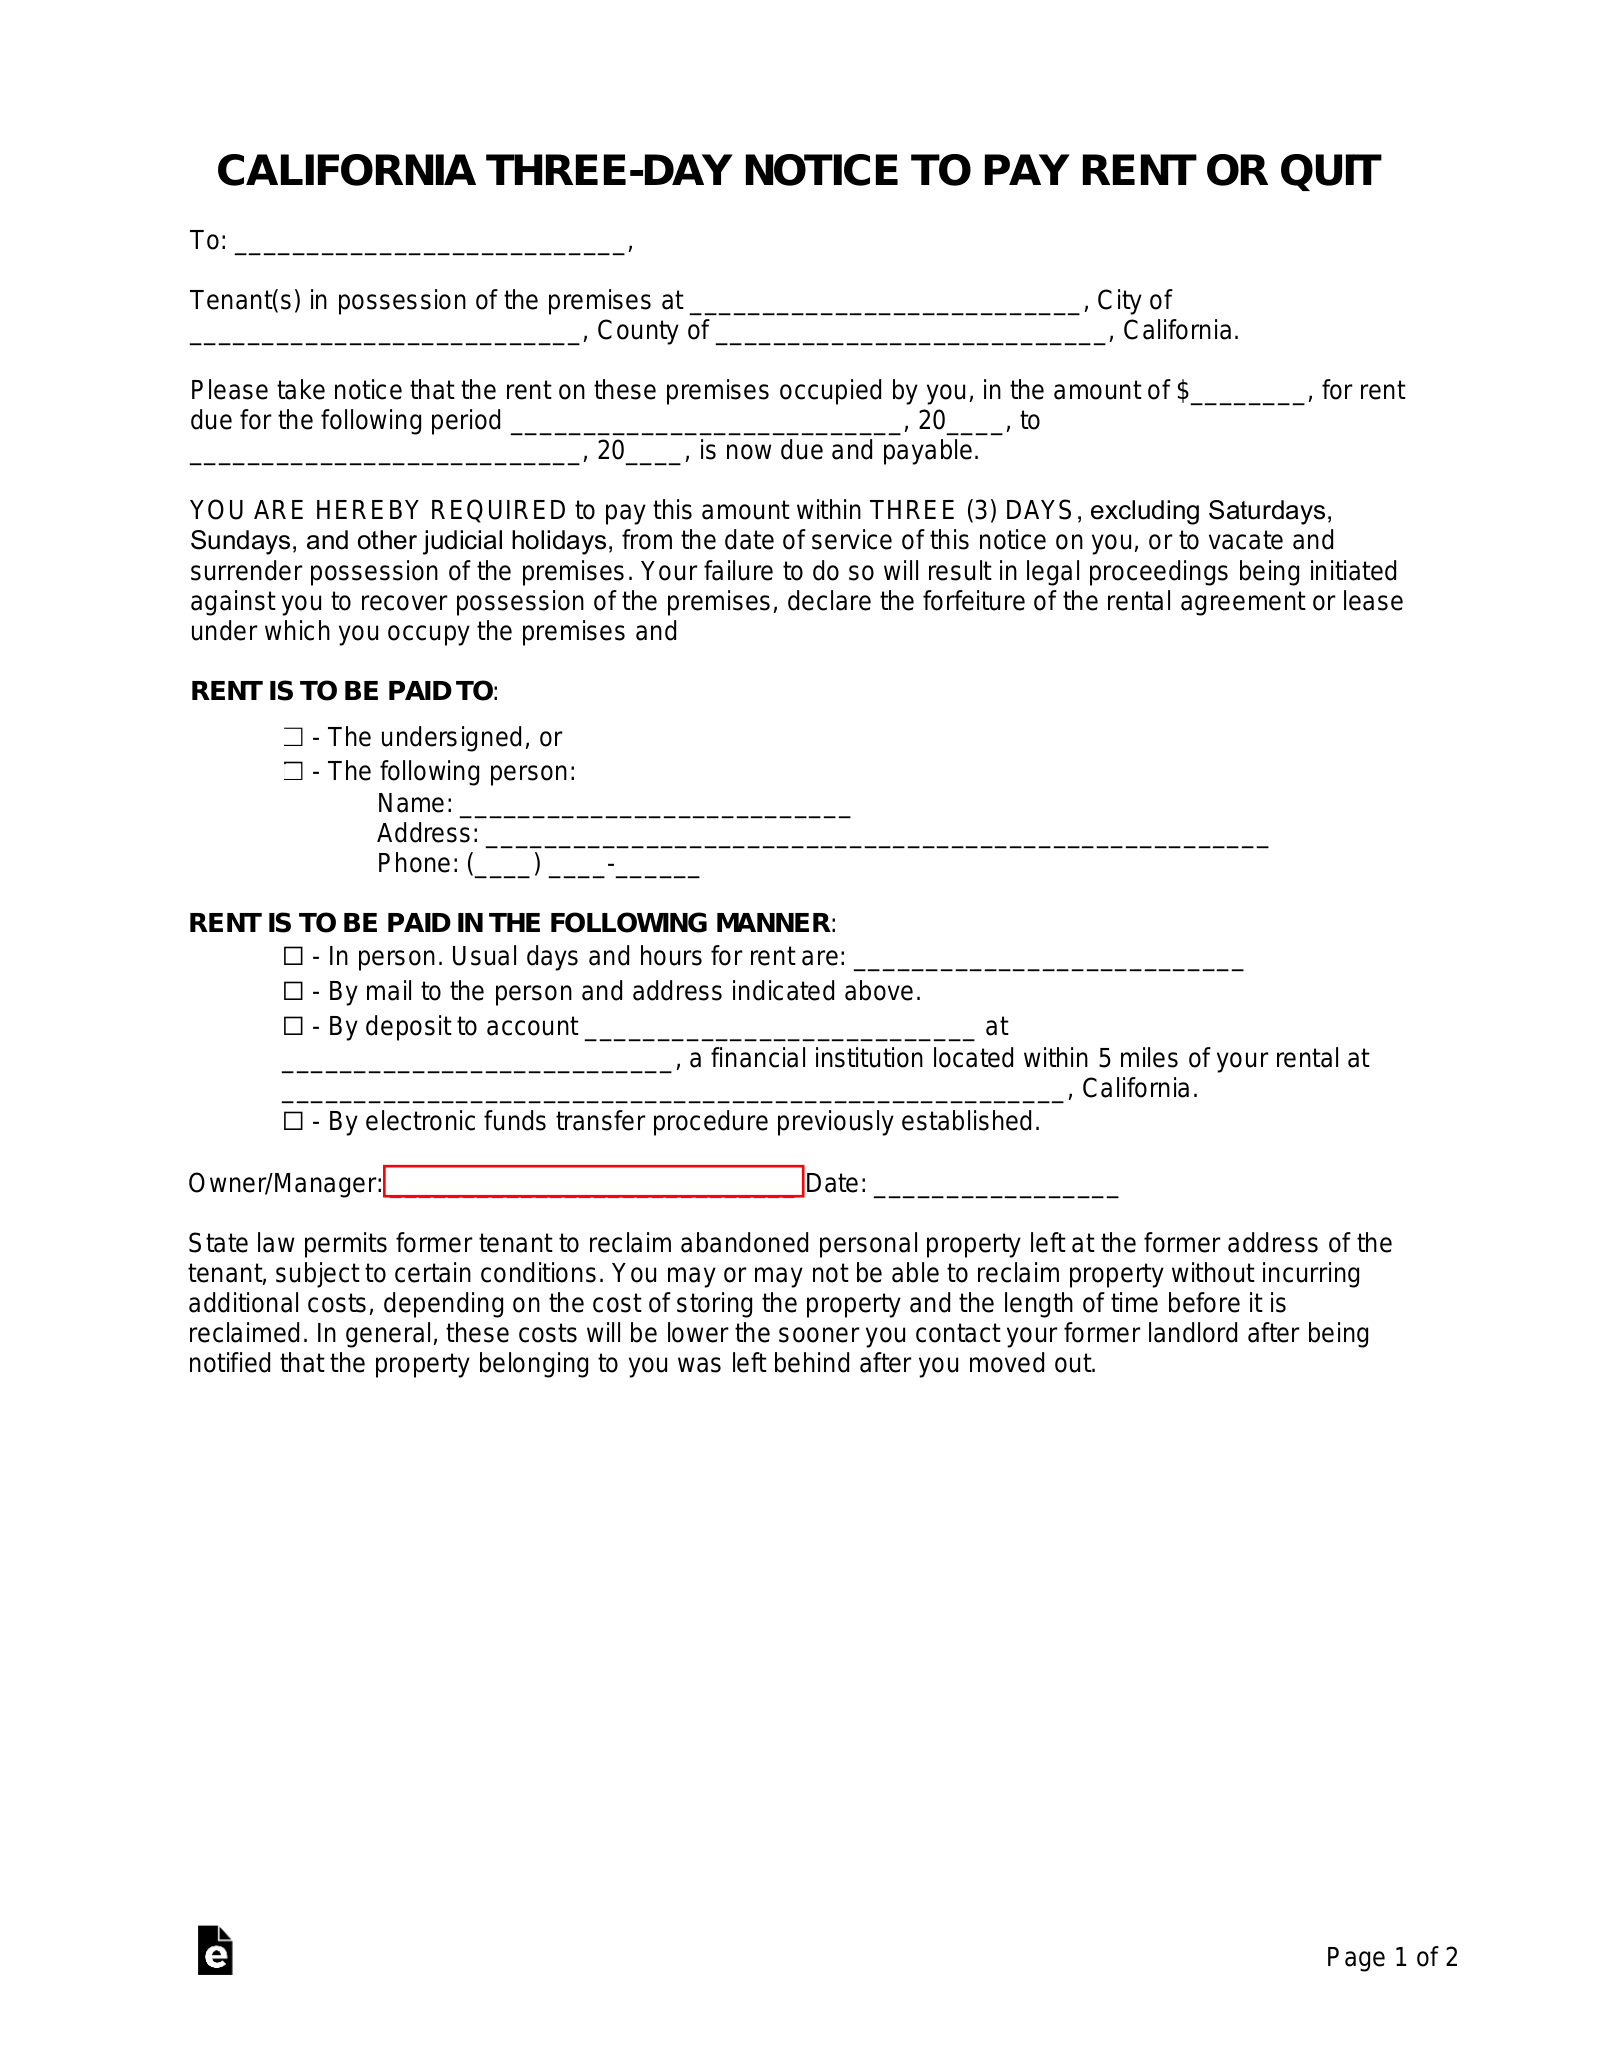 California 3-Day Notice to Quit Form | Non-Payment of Rent